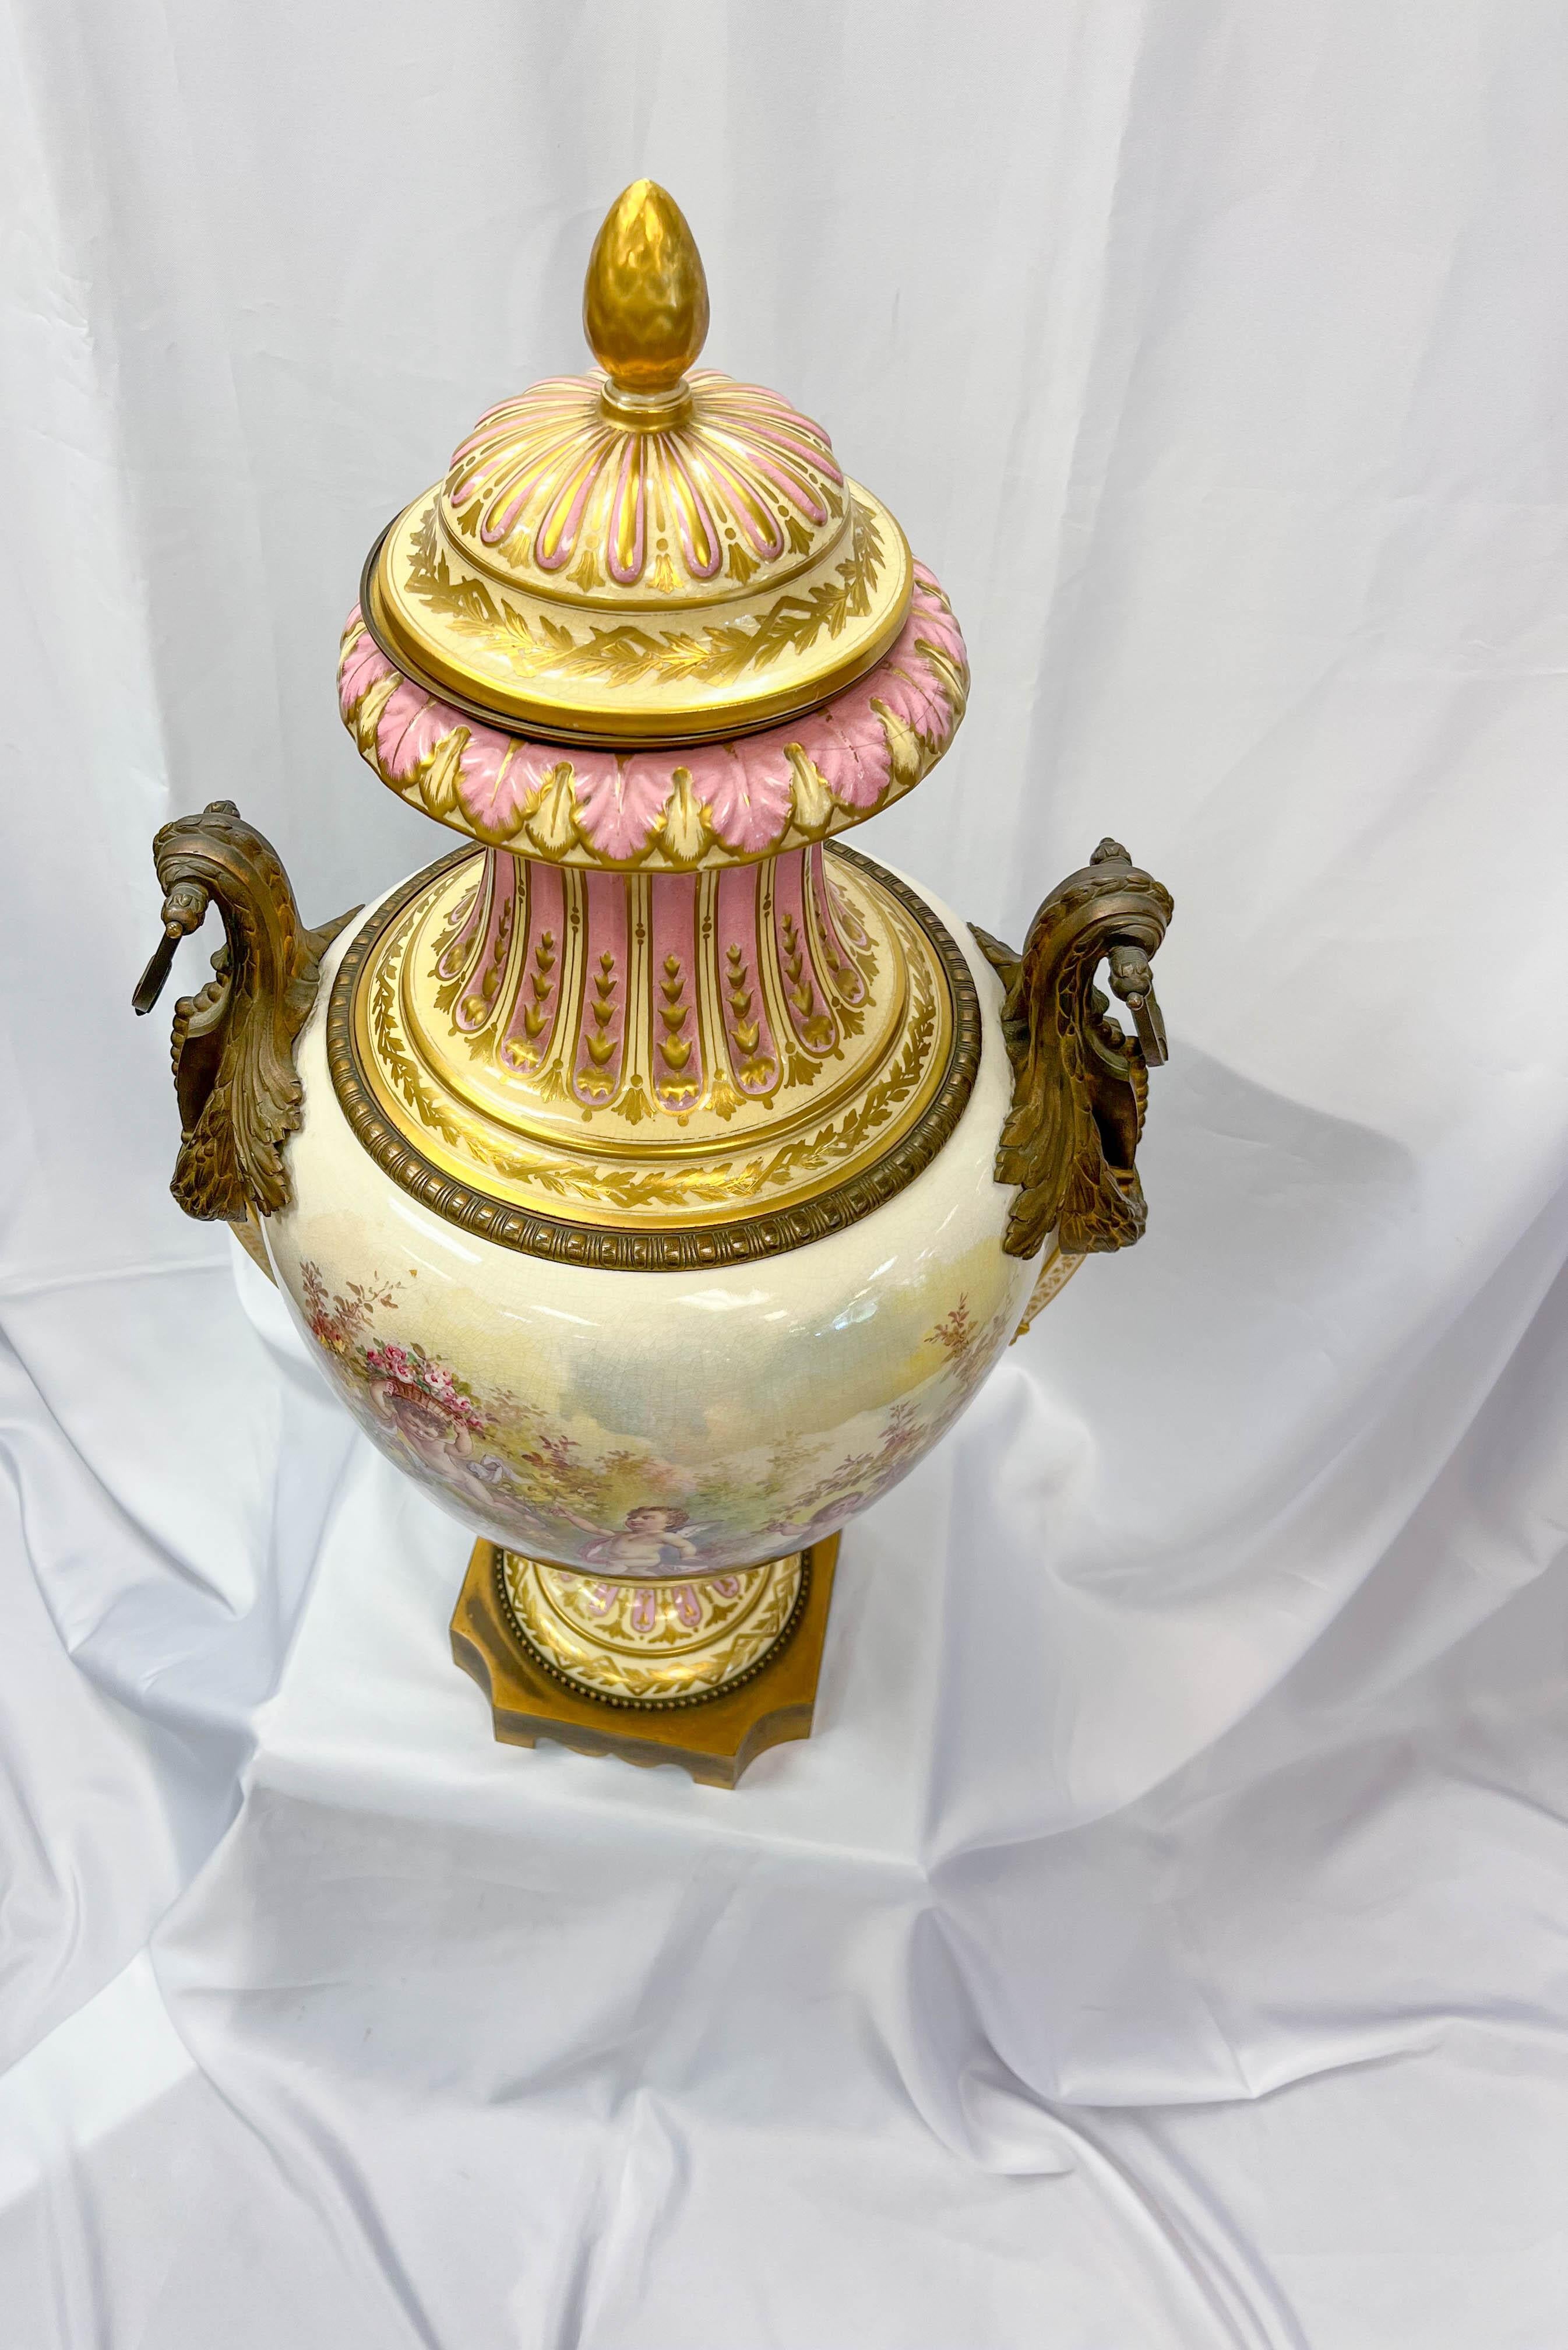 19th Century Large Scale Neoclassical Ormolu Sèvres Urn For Sale 4